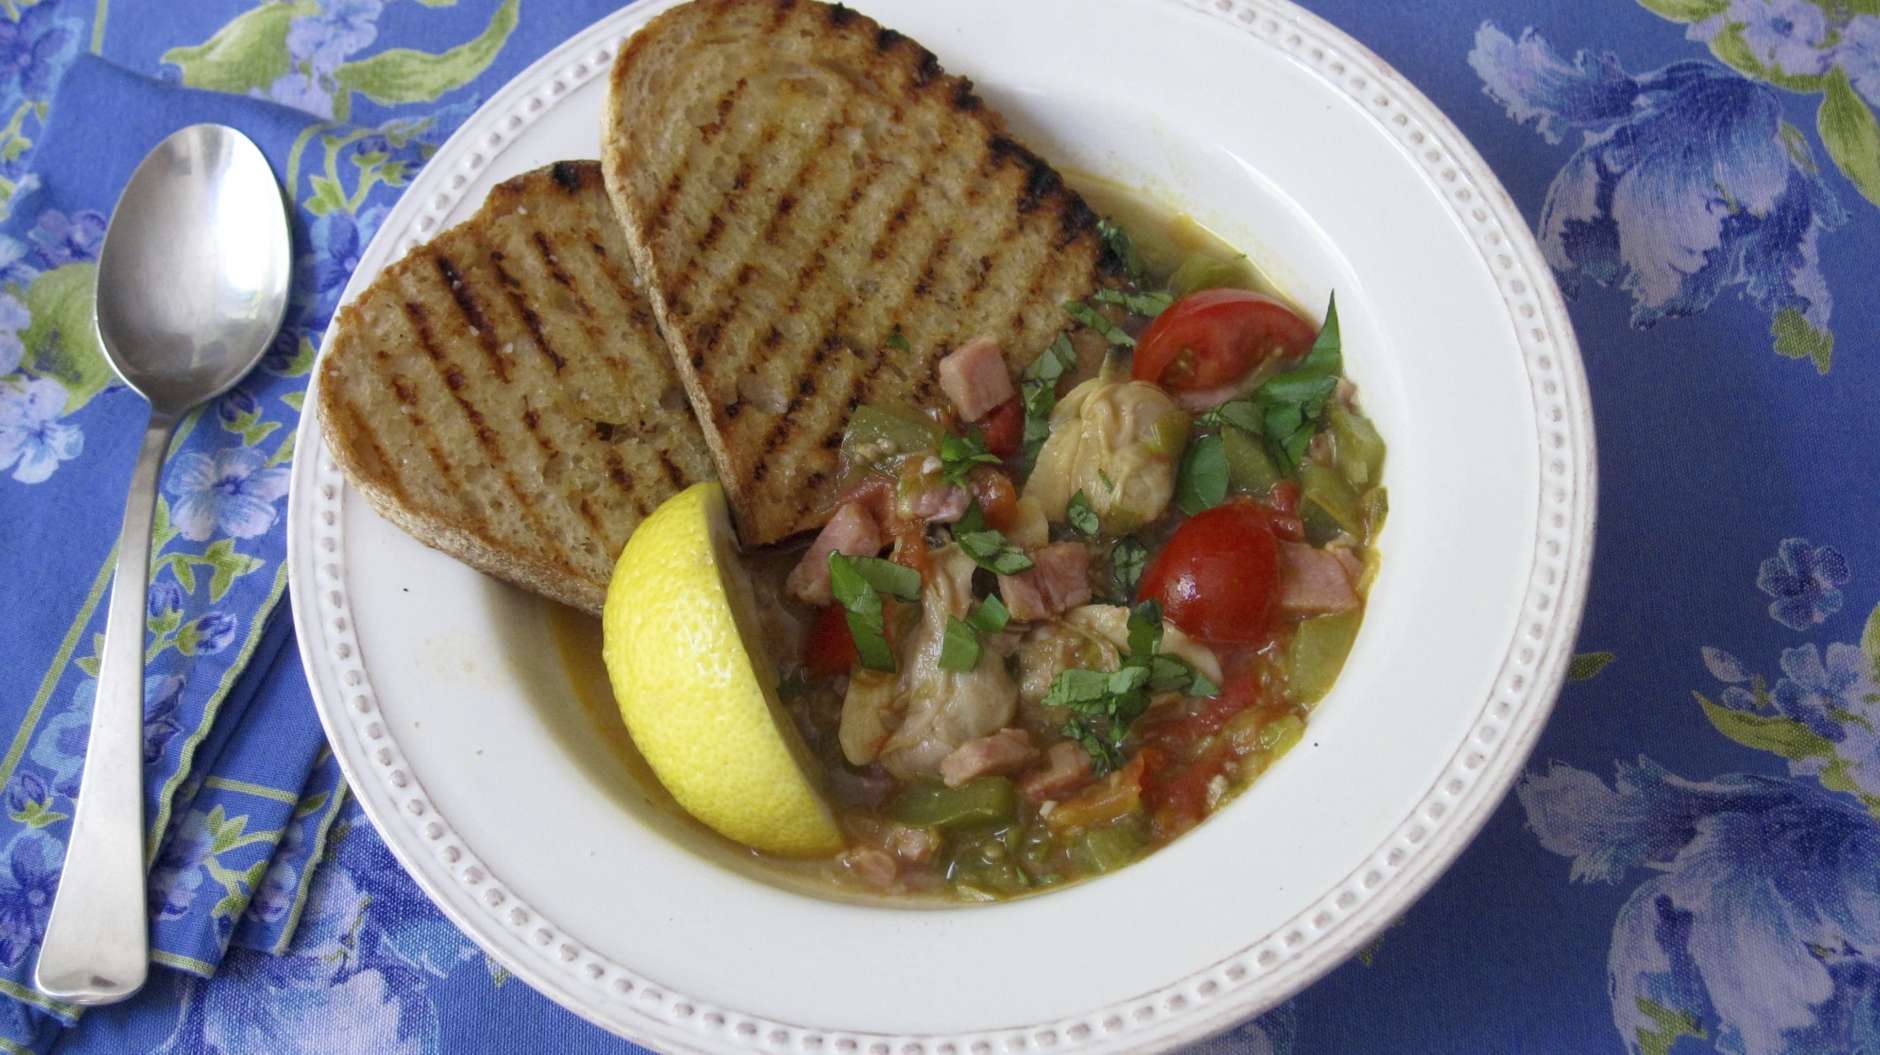 Thie June 20, 2017 photo shows a clam, tomato and bacon stew with grilled garlic bread in New York. This dish is from a recipe by Sara Moulton. (Sara Moulton via AP)